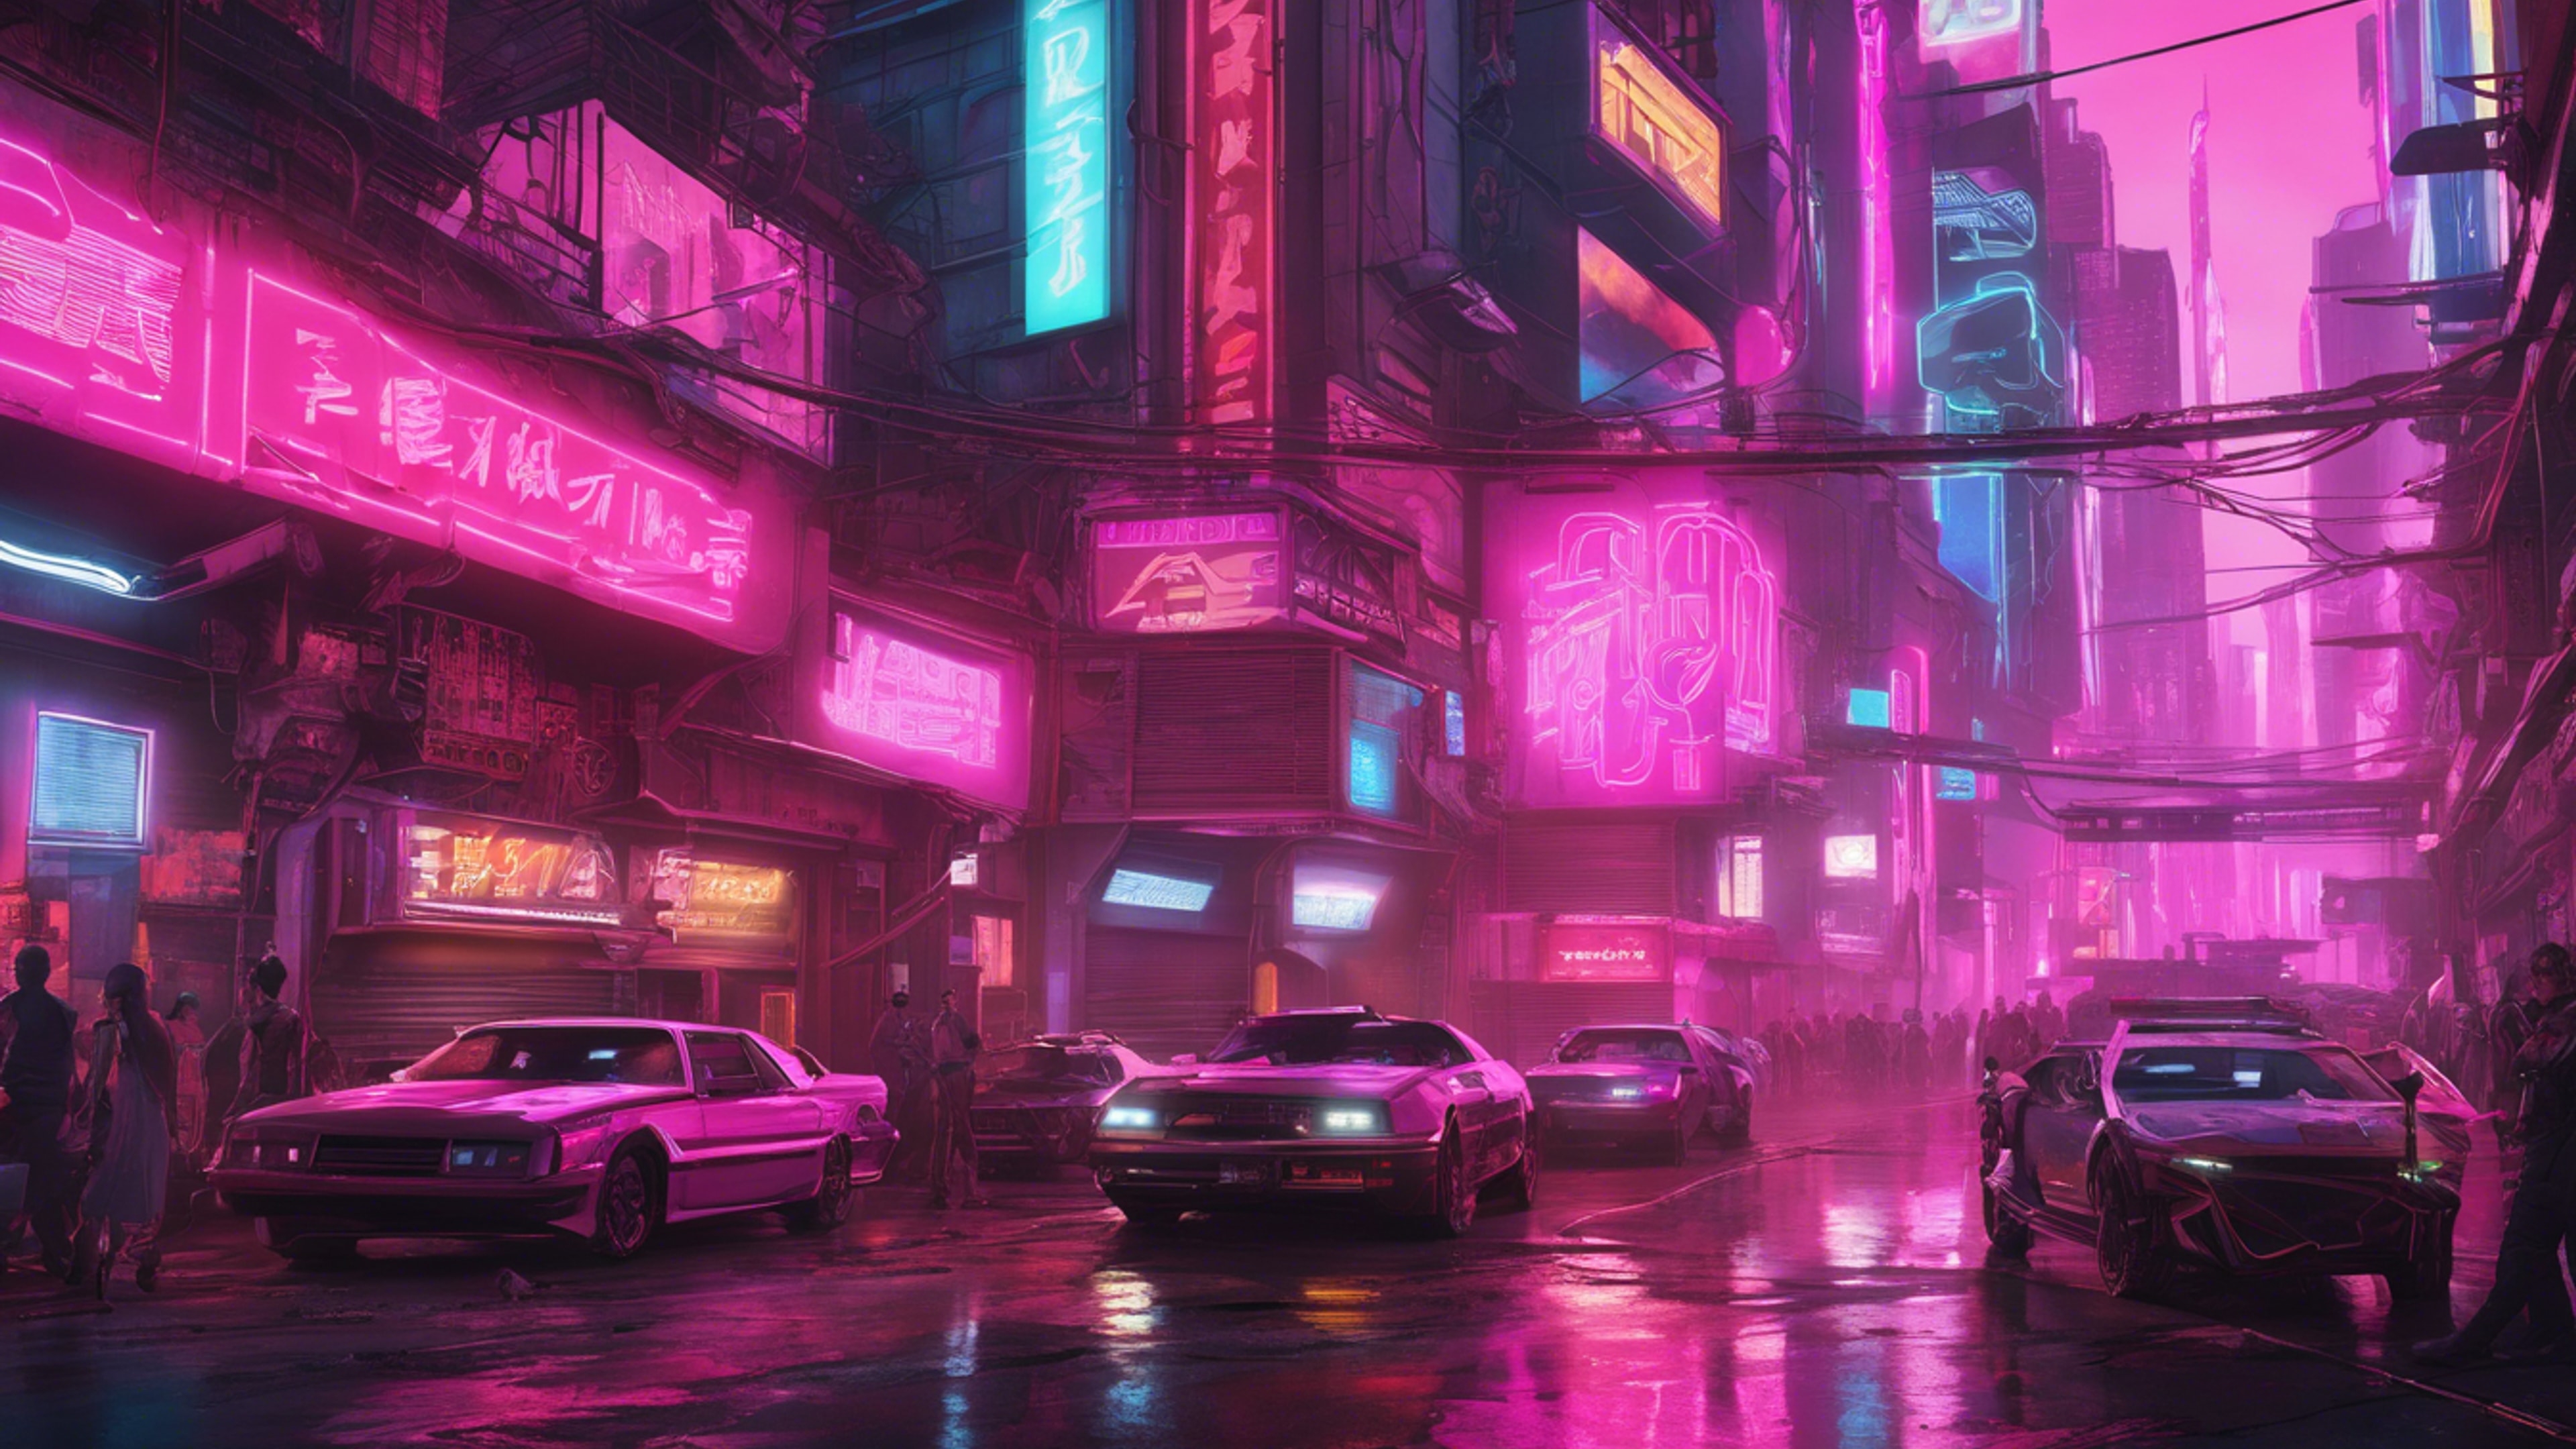 A wide-angle view of a bustling city street in the future, dominated by pink neon signs. Tapet[5759e15553a14a8aa13a]